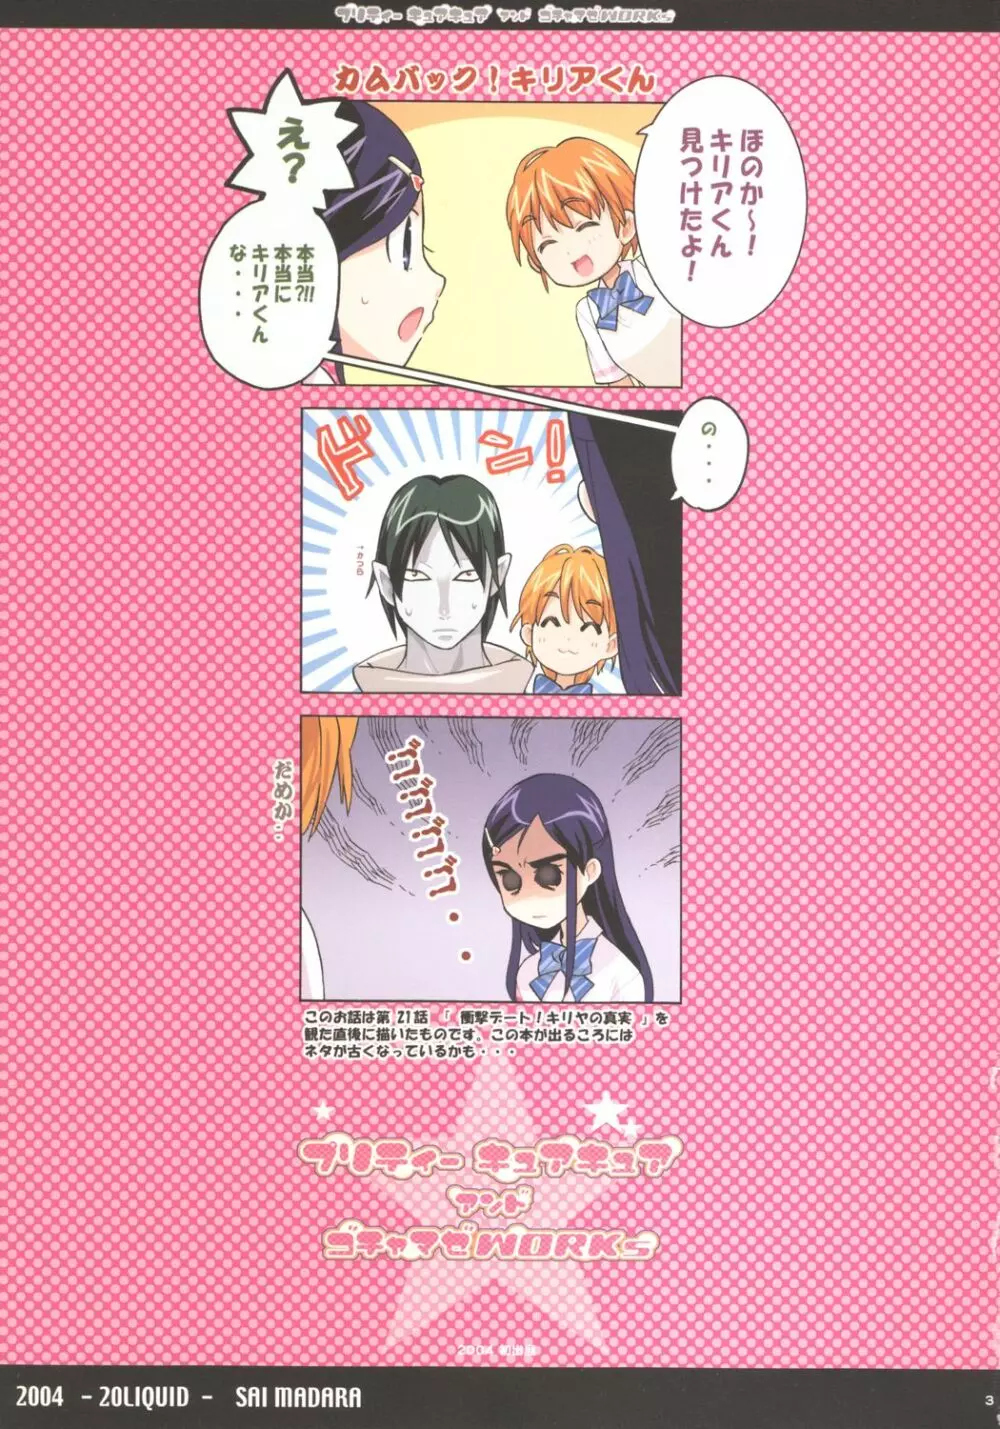 Pretty CureCure And Gochamaze Works {Pretty Cure} - page2